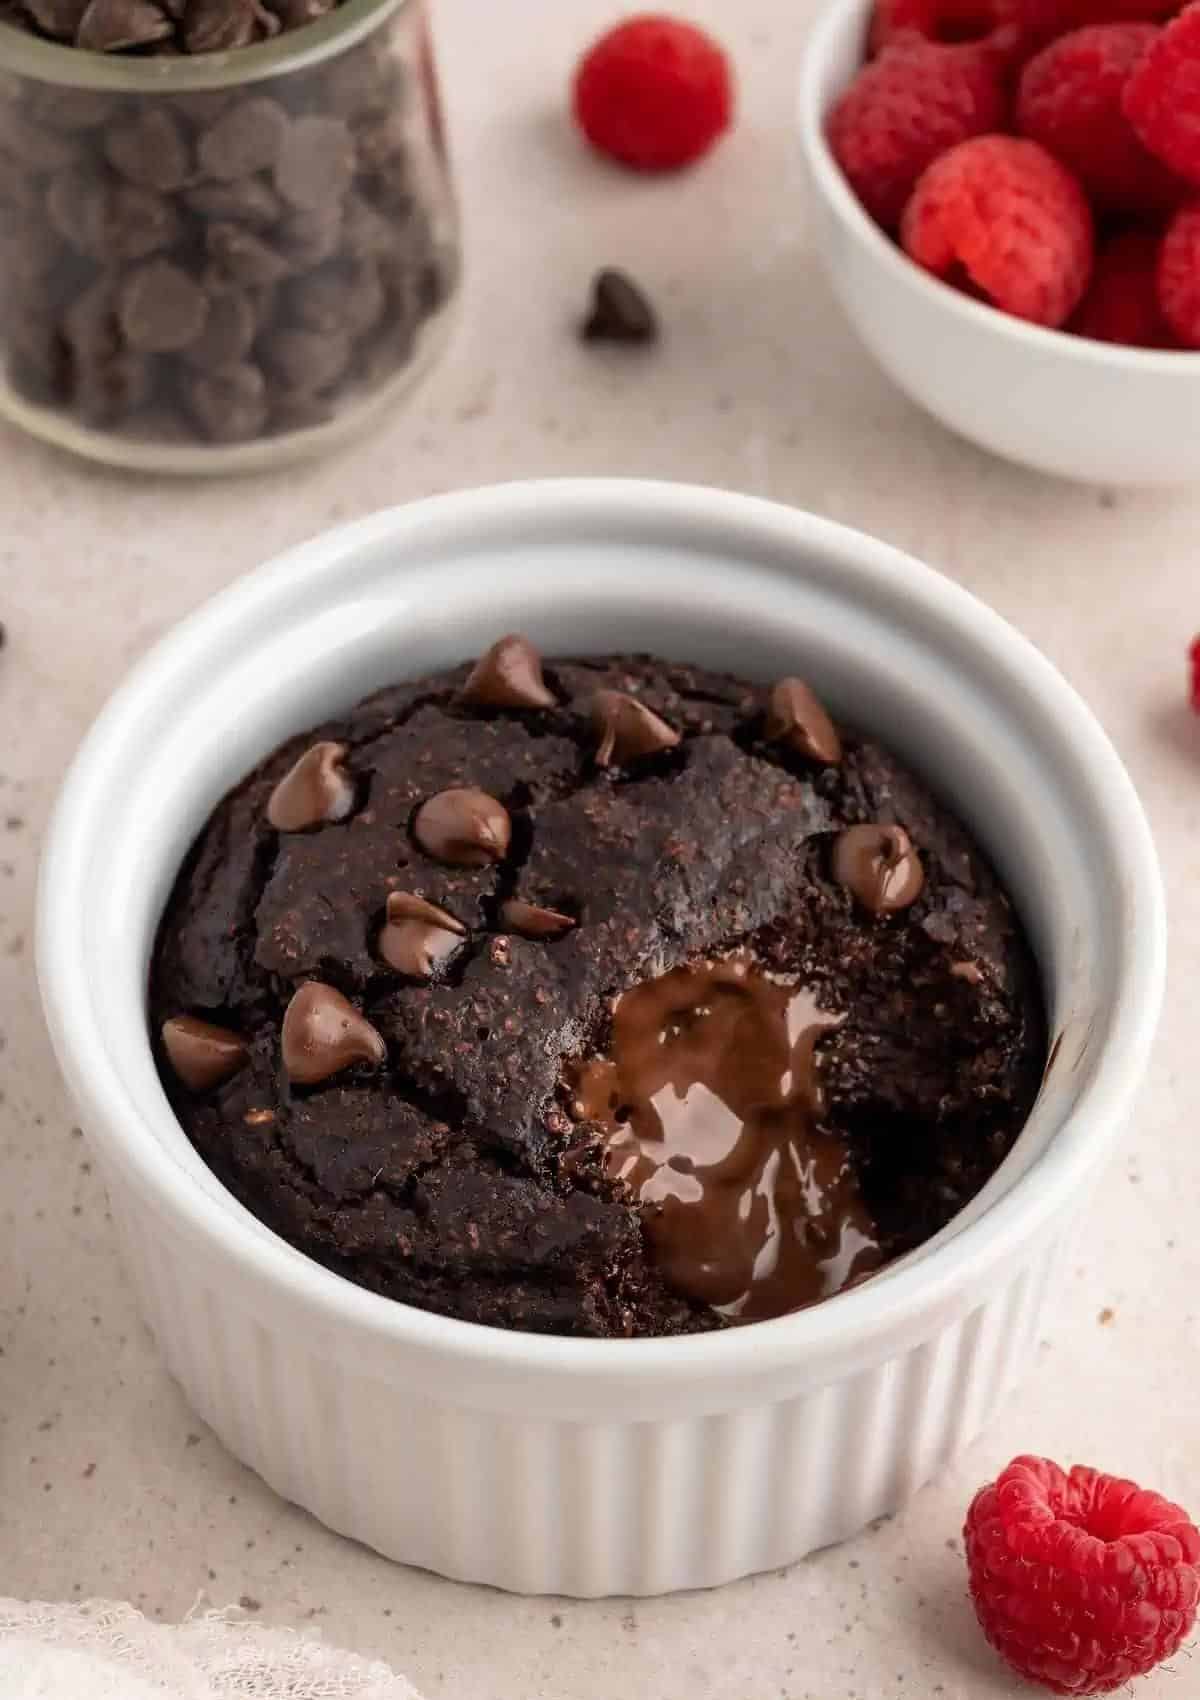 Chocolate cake with melted chocolate chips in a white little bowl.